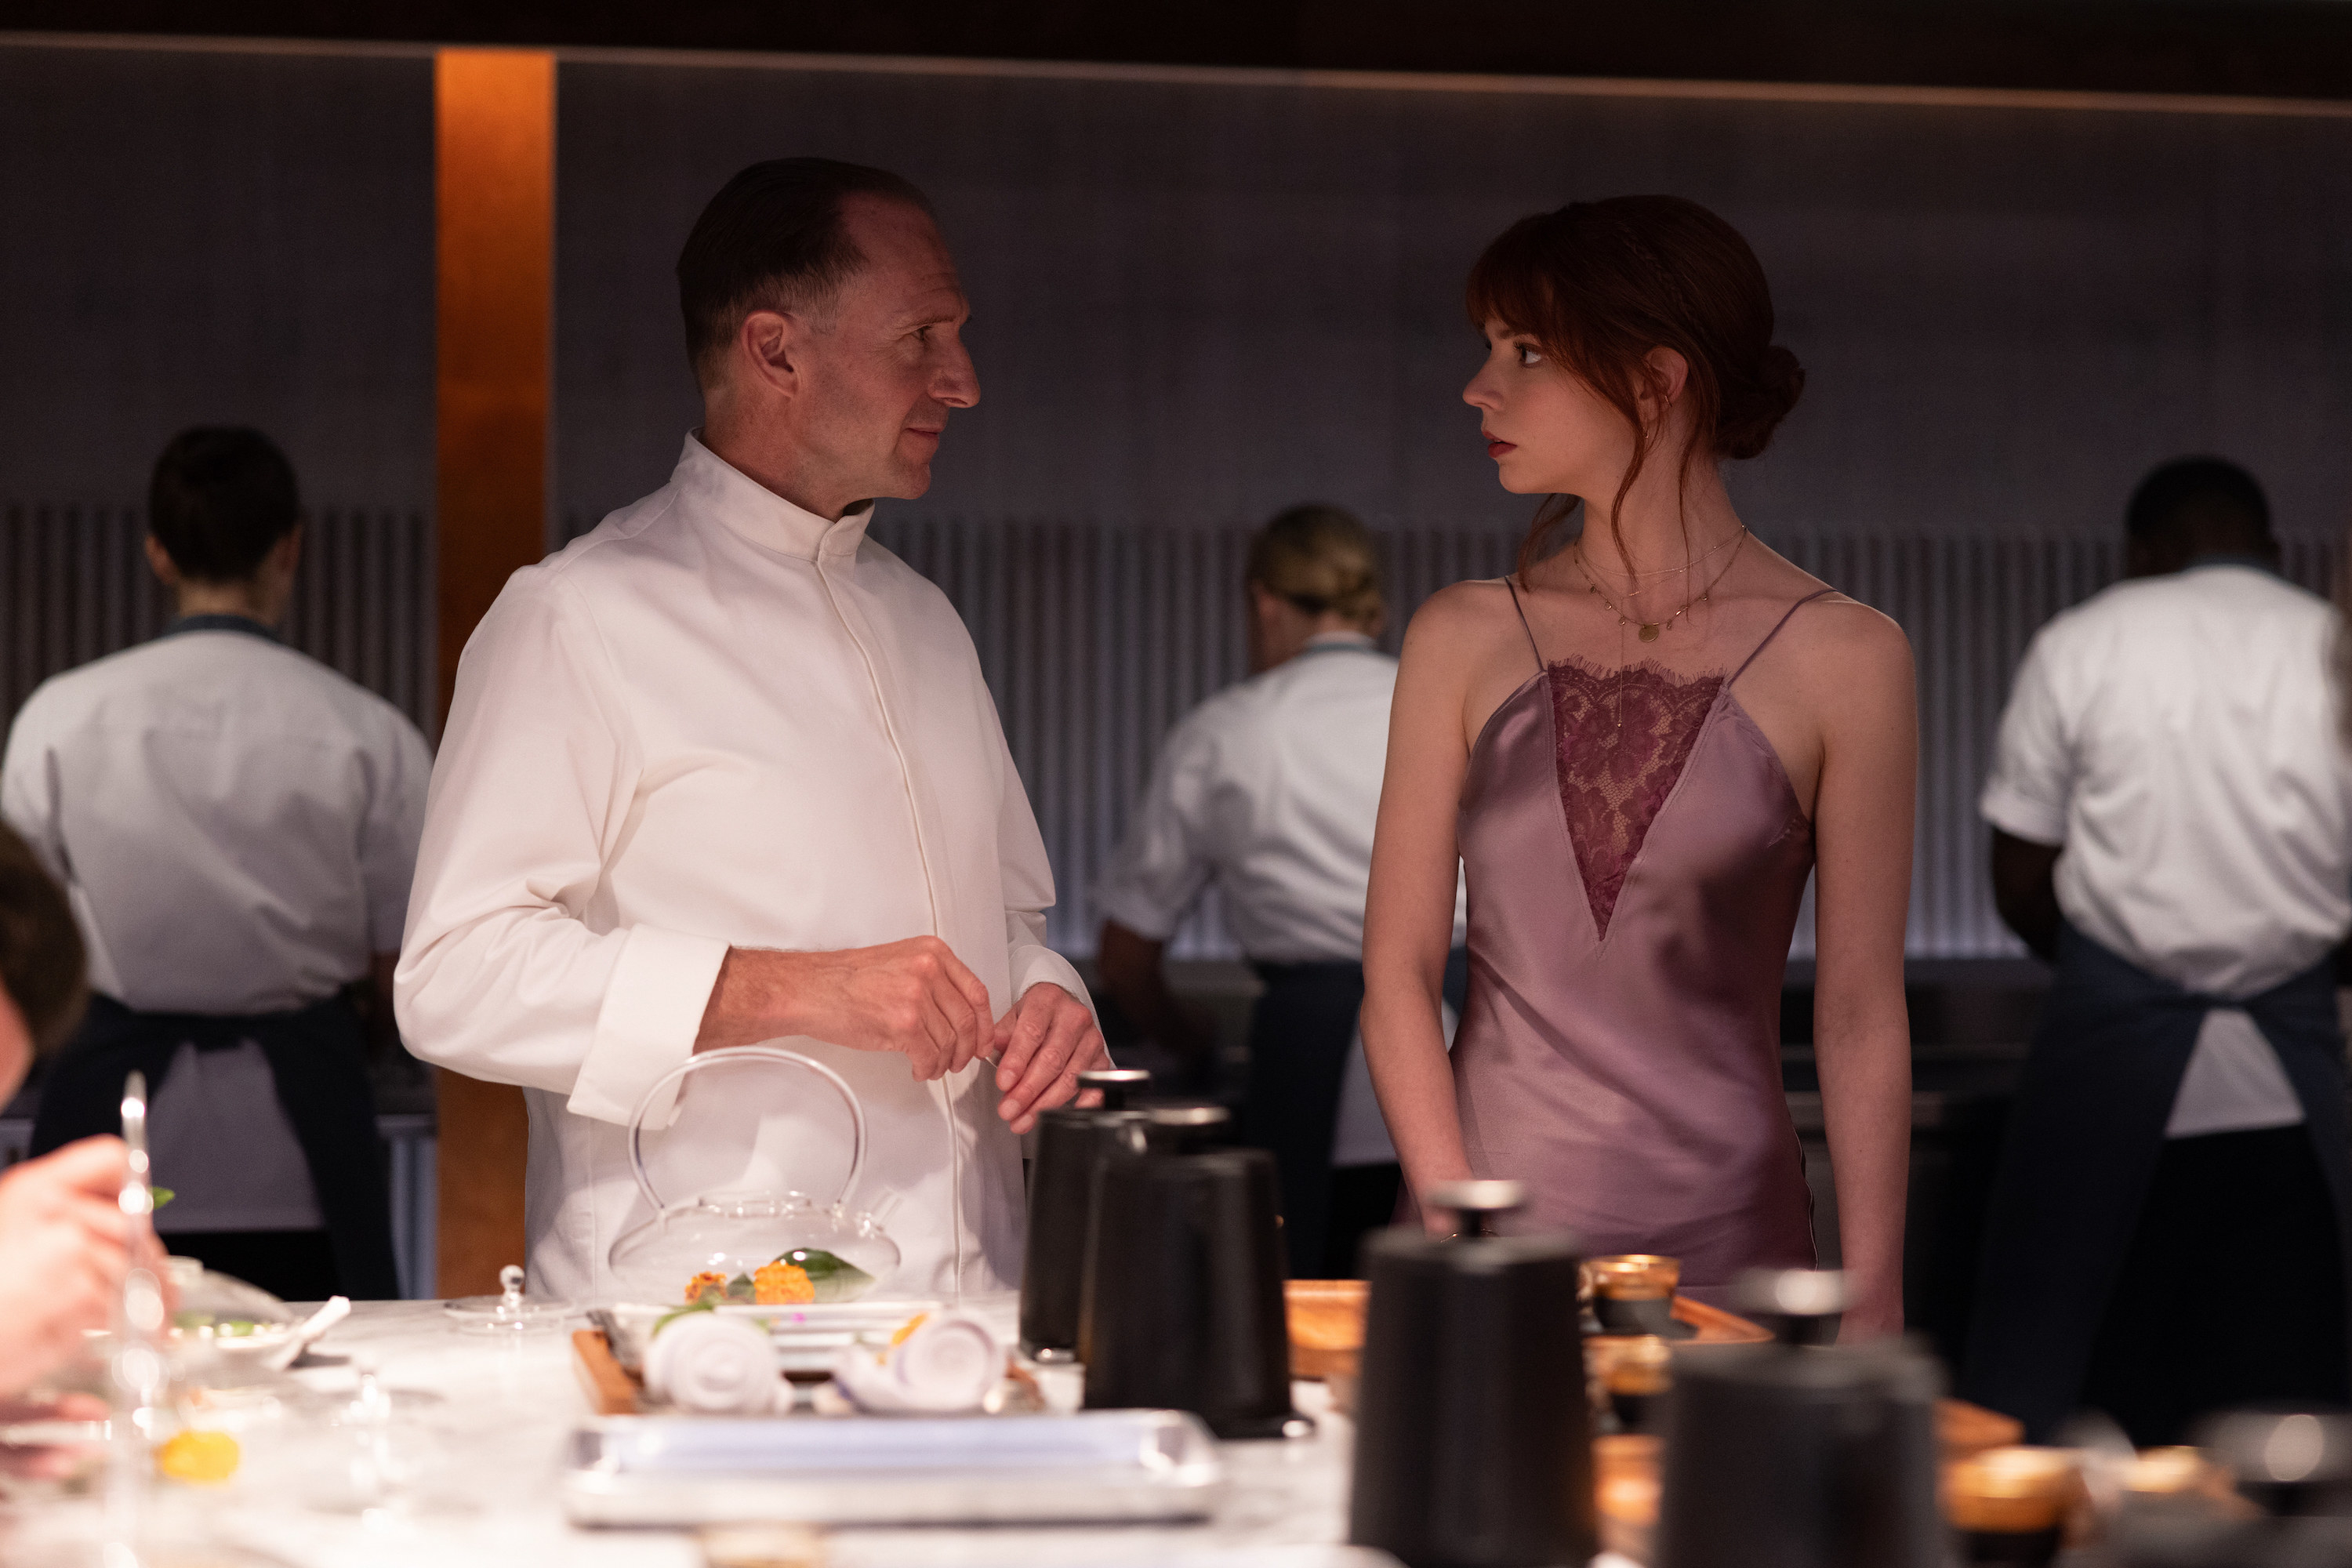 Ralph Fiennes and Anya Taylor-Joy look at one another in a kitchen